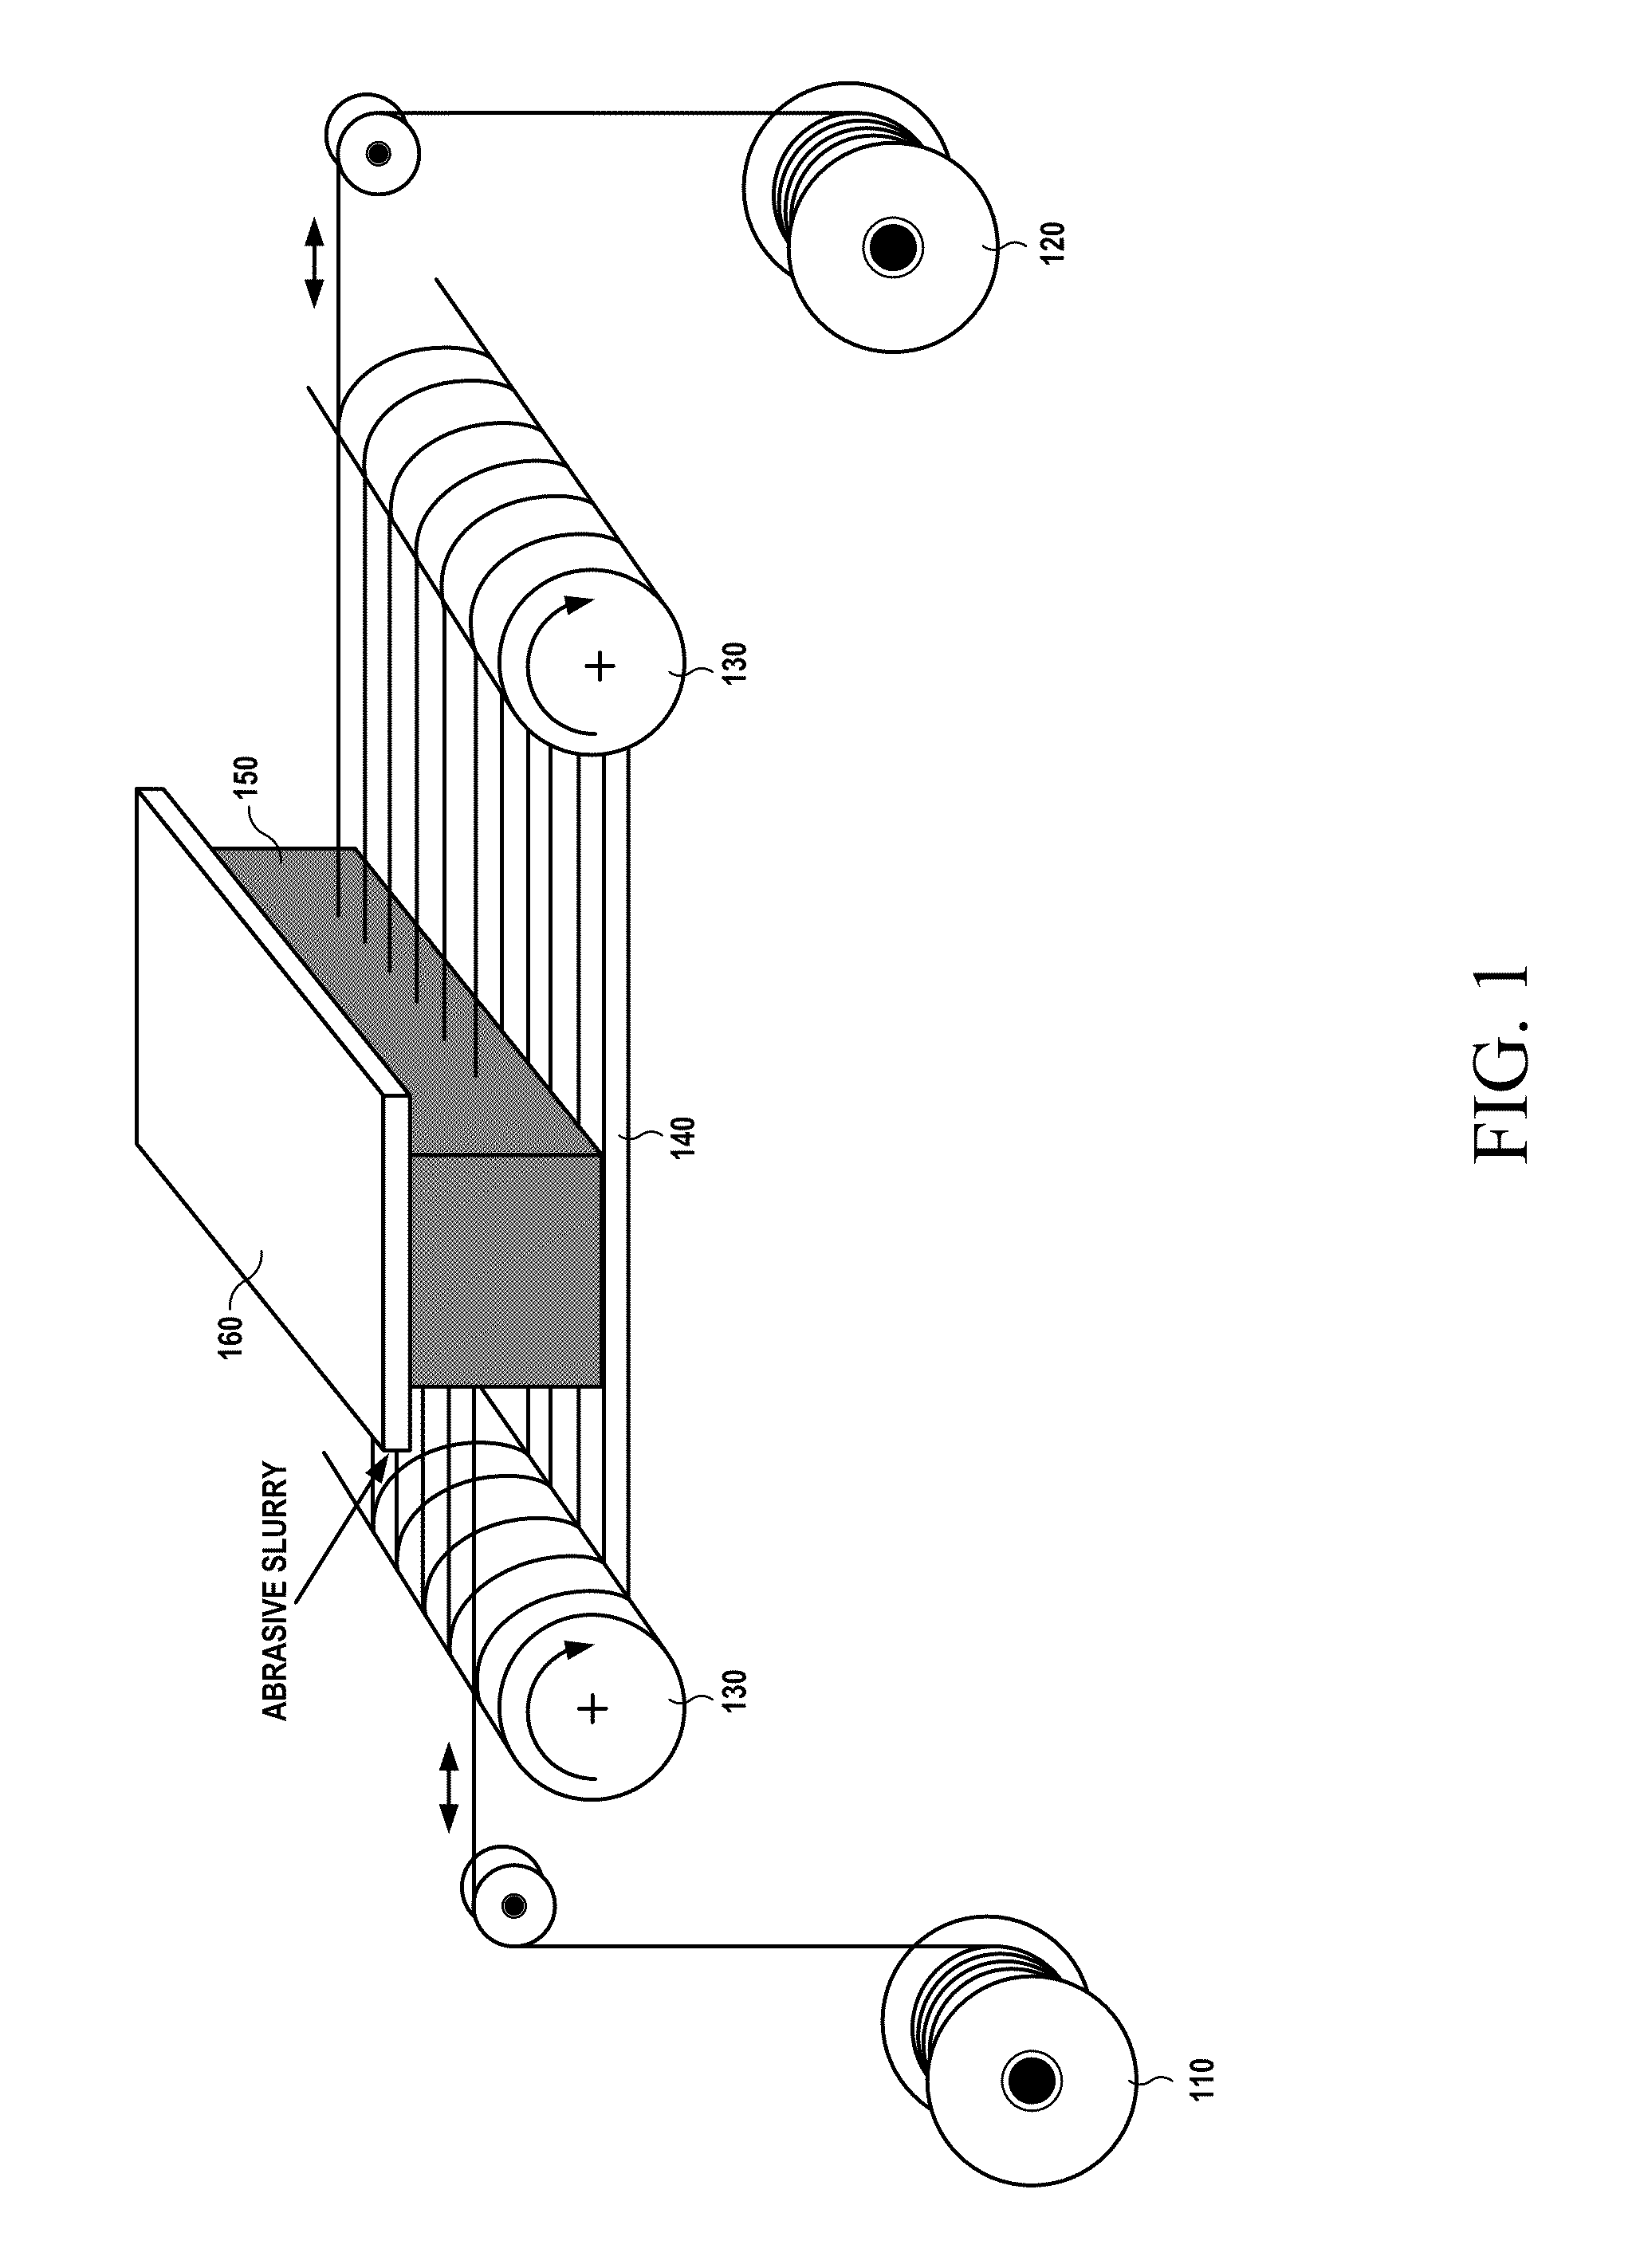 In-situ wafer processing system and method